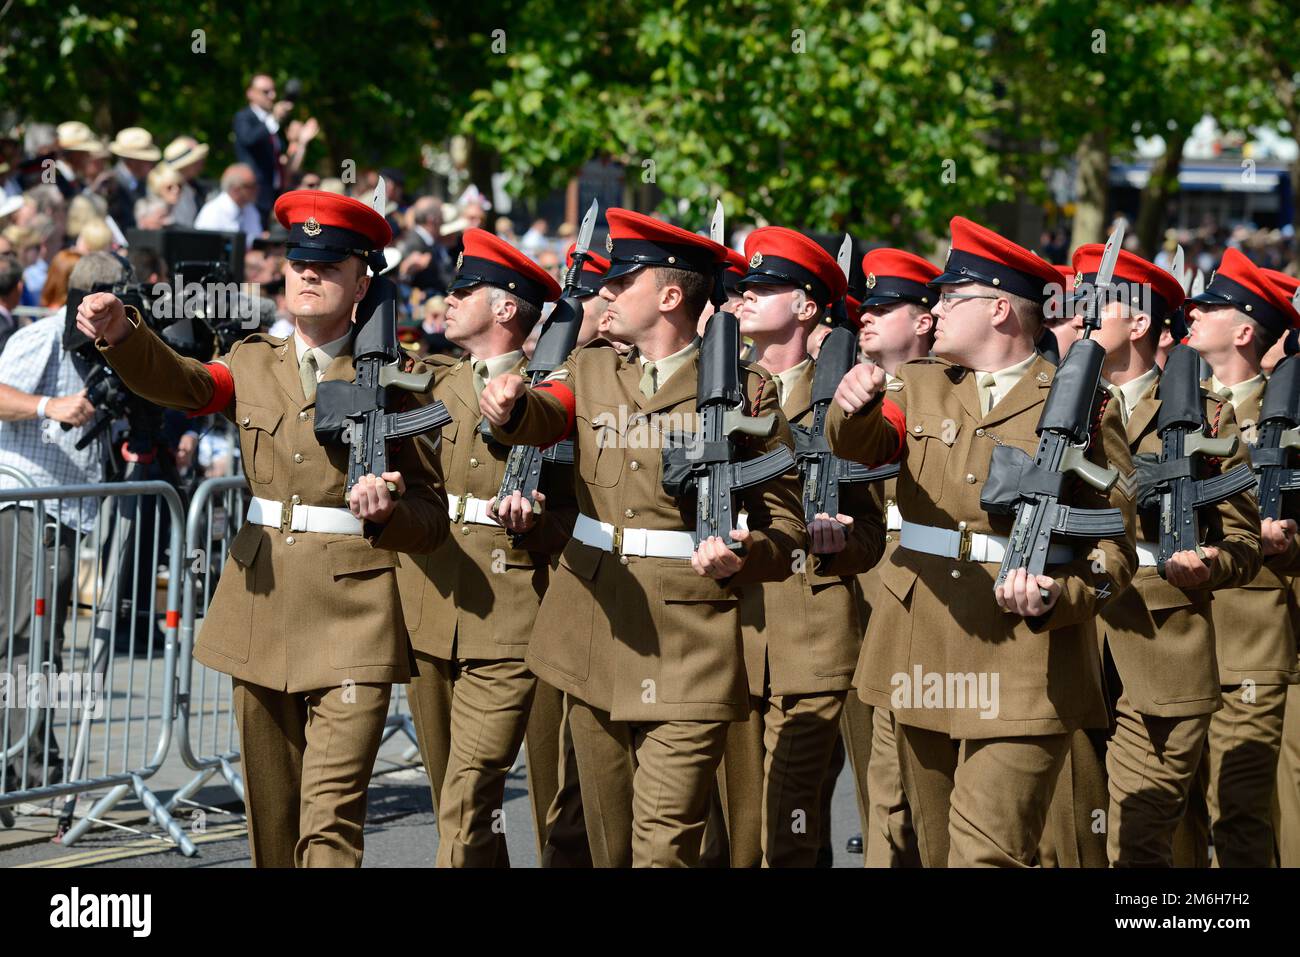 British army soldiers of the Royal Military Police; a Red Cap, march on parade Stock Photo